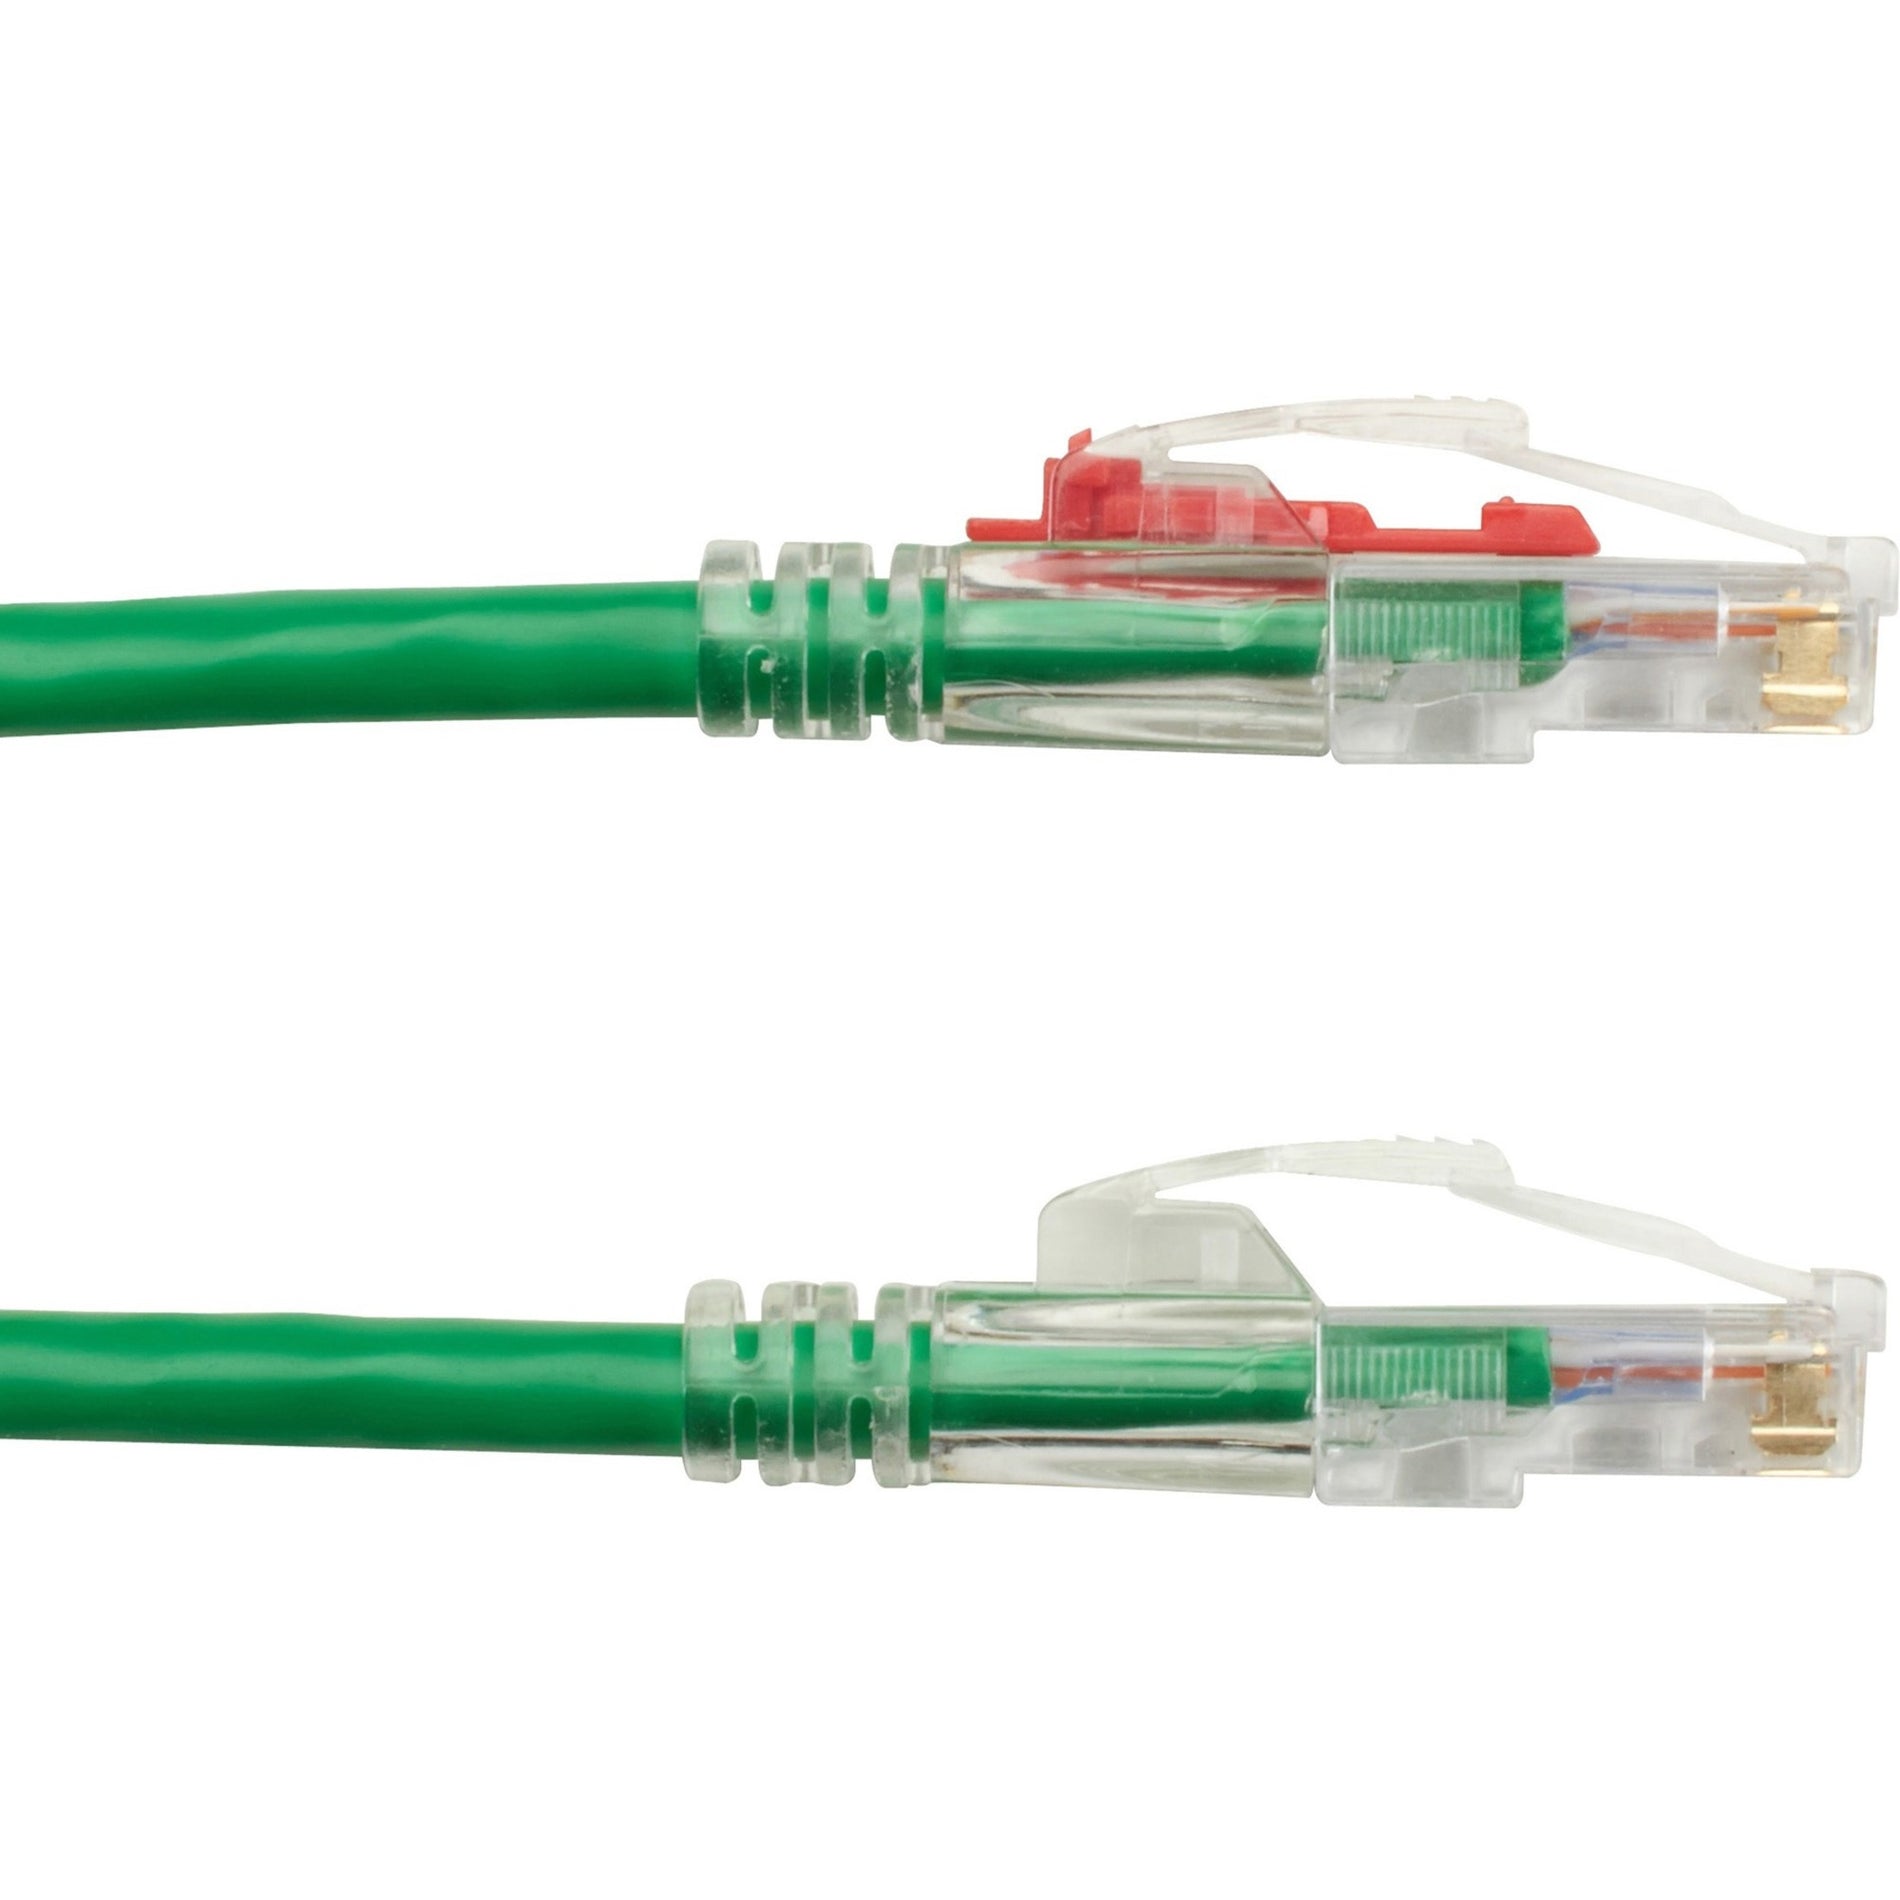 Black Box C6PC70-GN-05 GigaTrue 3 Cat.6 UTP Patch Network Cable, 5 ft, Green